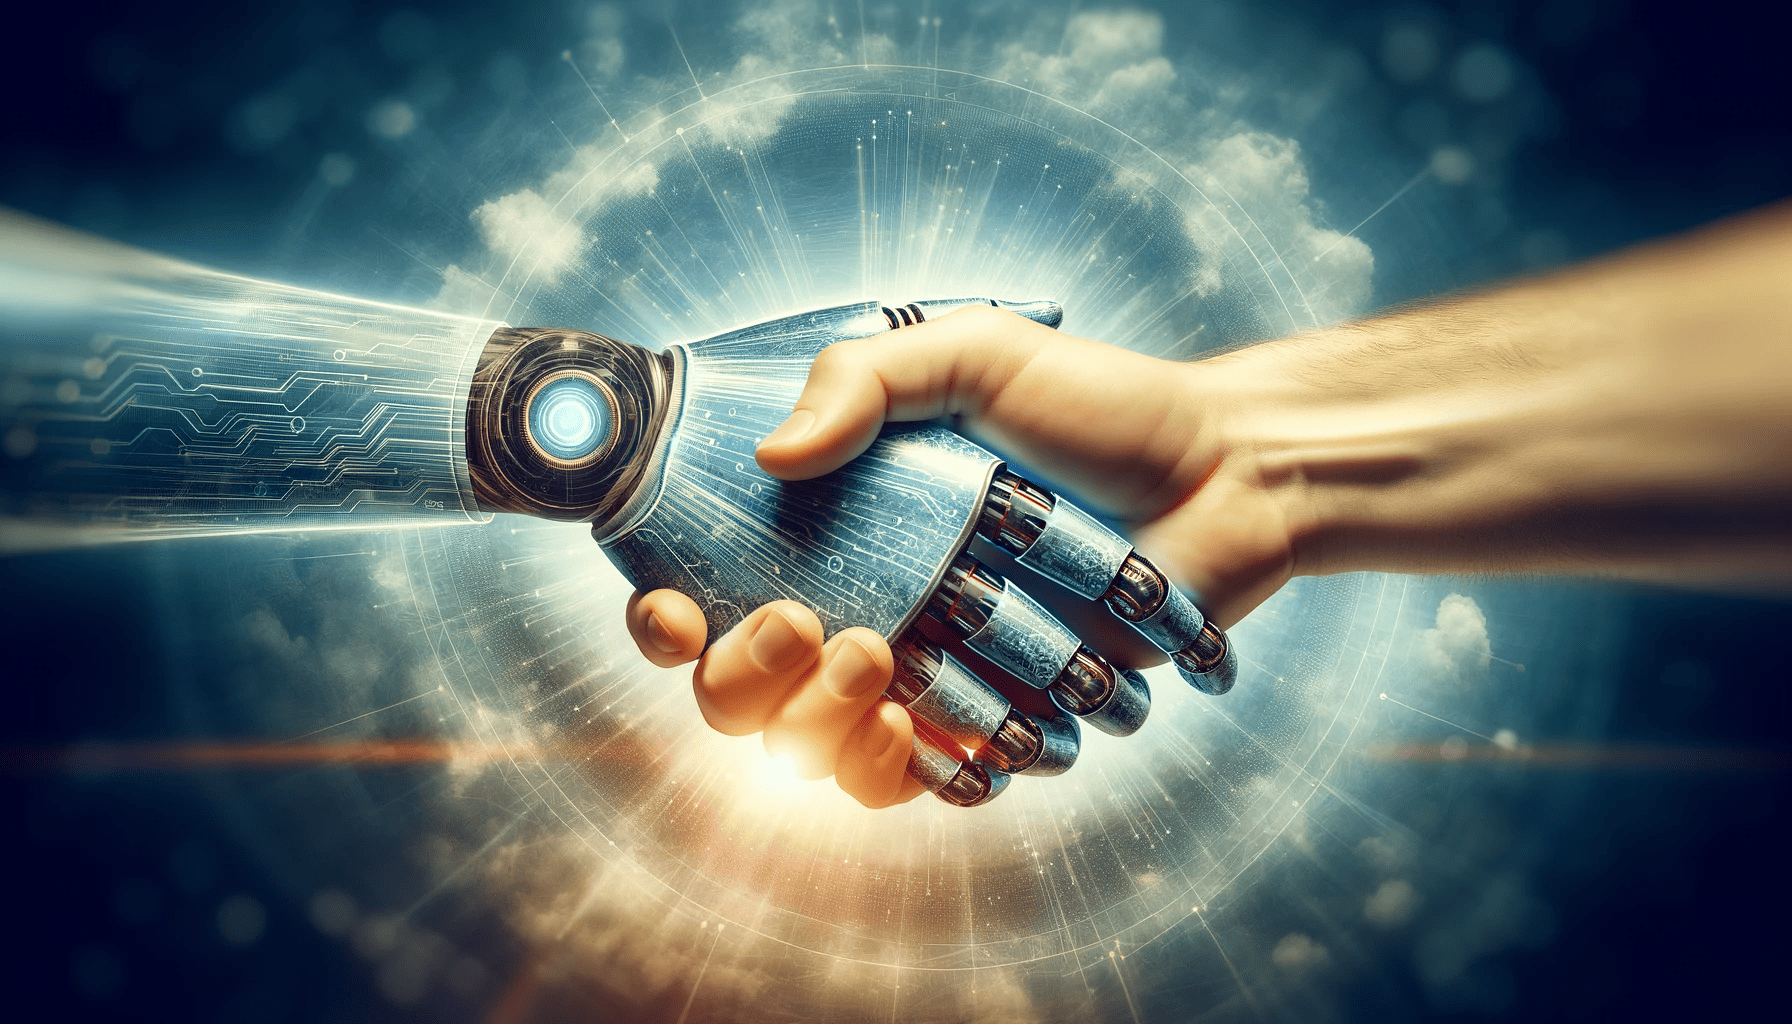 a-symbolic-handshake-between-a-human-hand-and-a-digital-robotic-hand-representing-the-collaboration-between-humans-and-AI